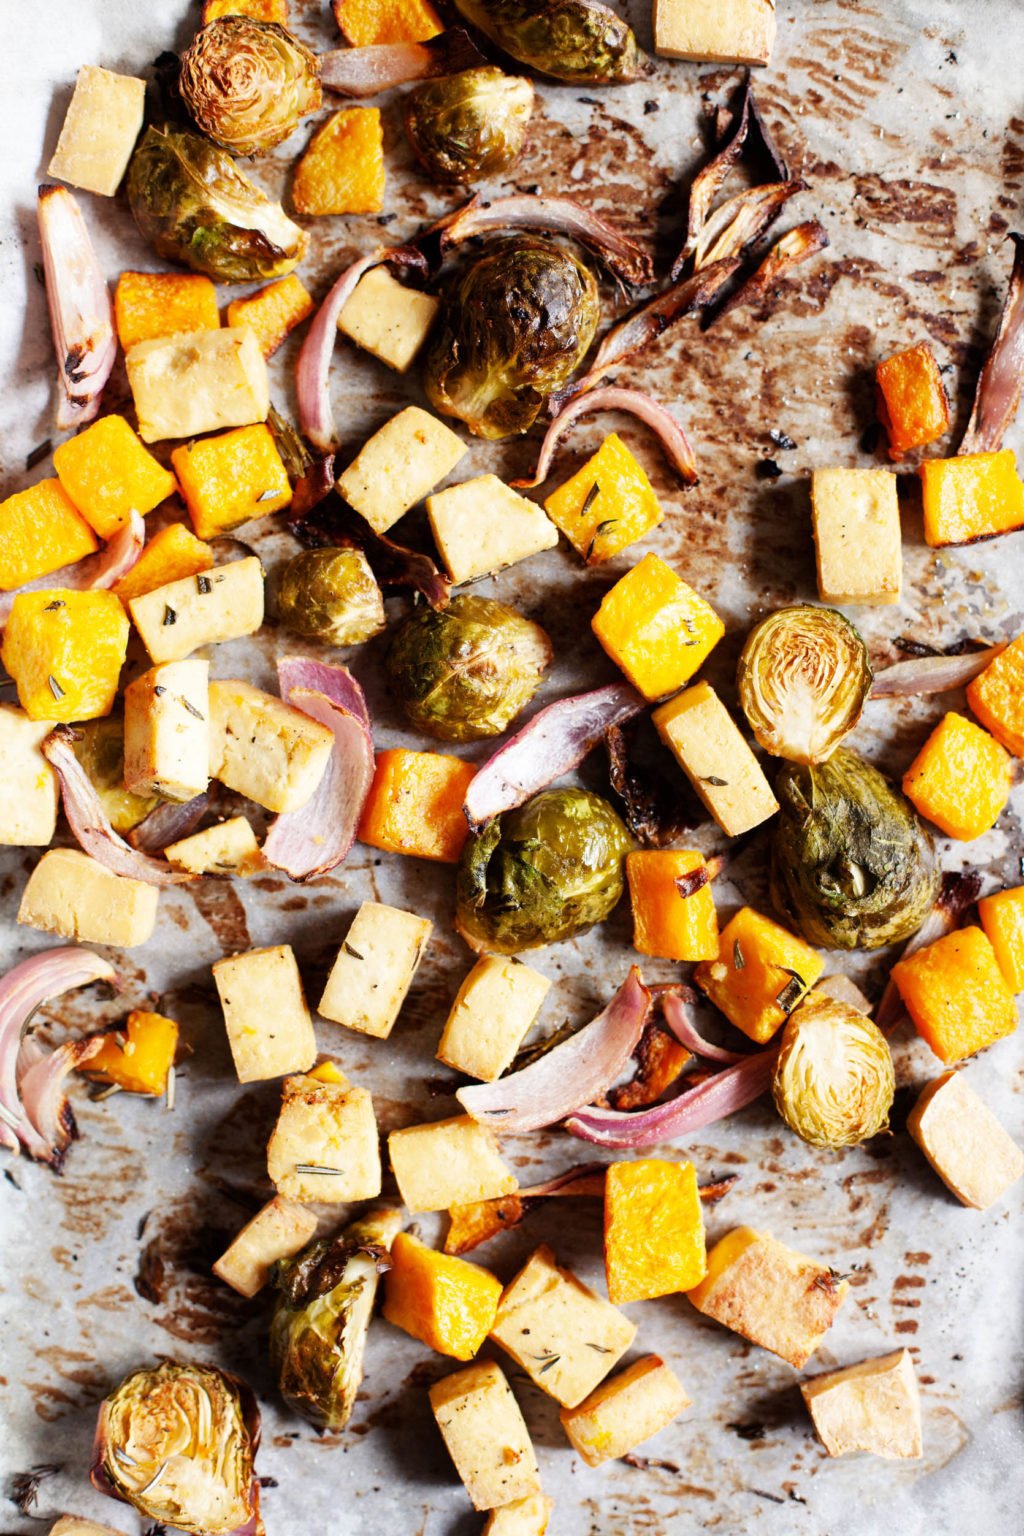 A baking sheet is covered with freshly roasted autumn produce and herbs.